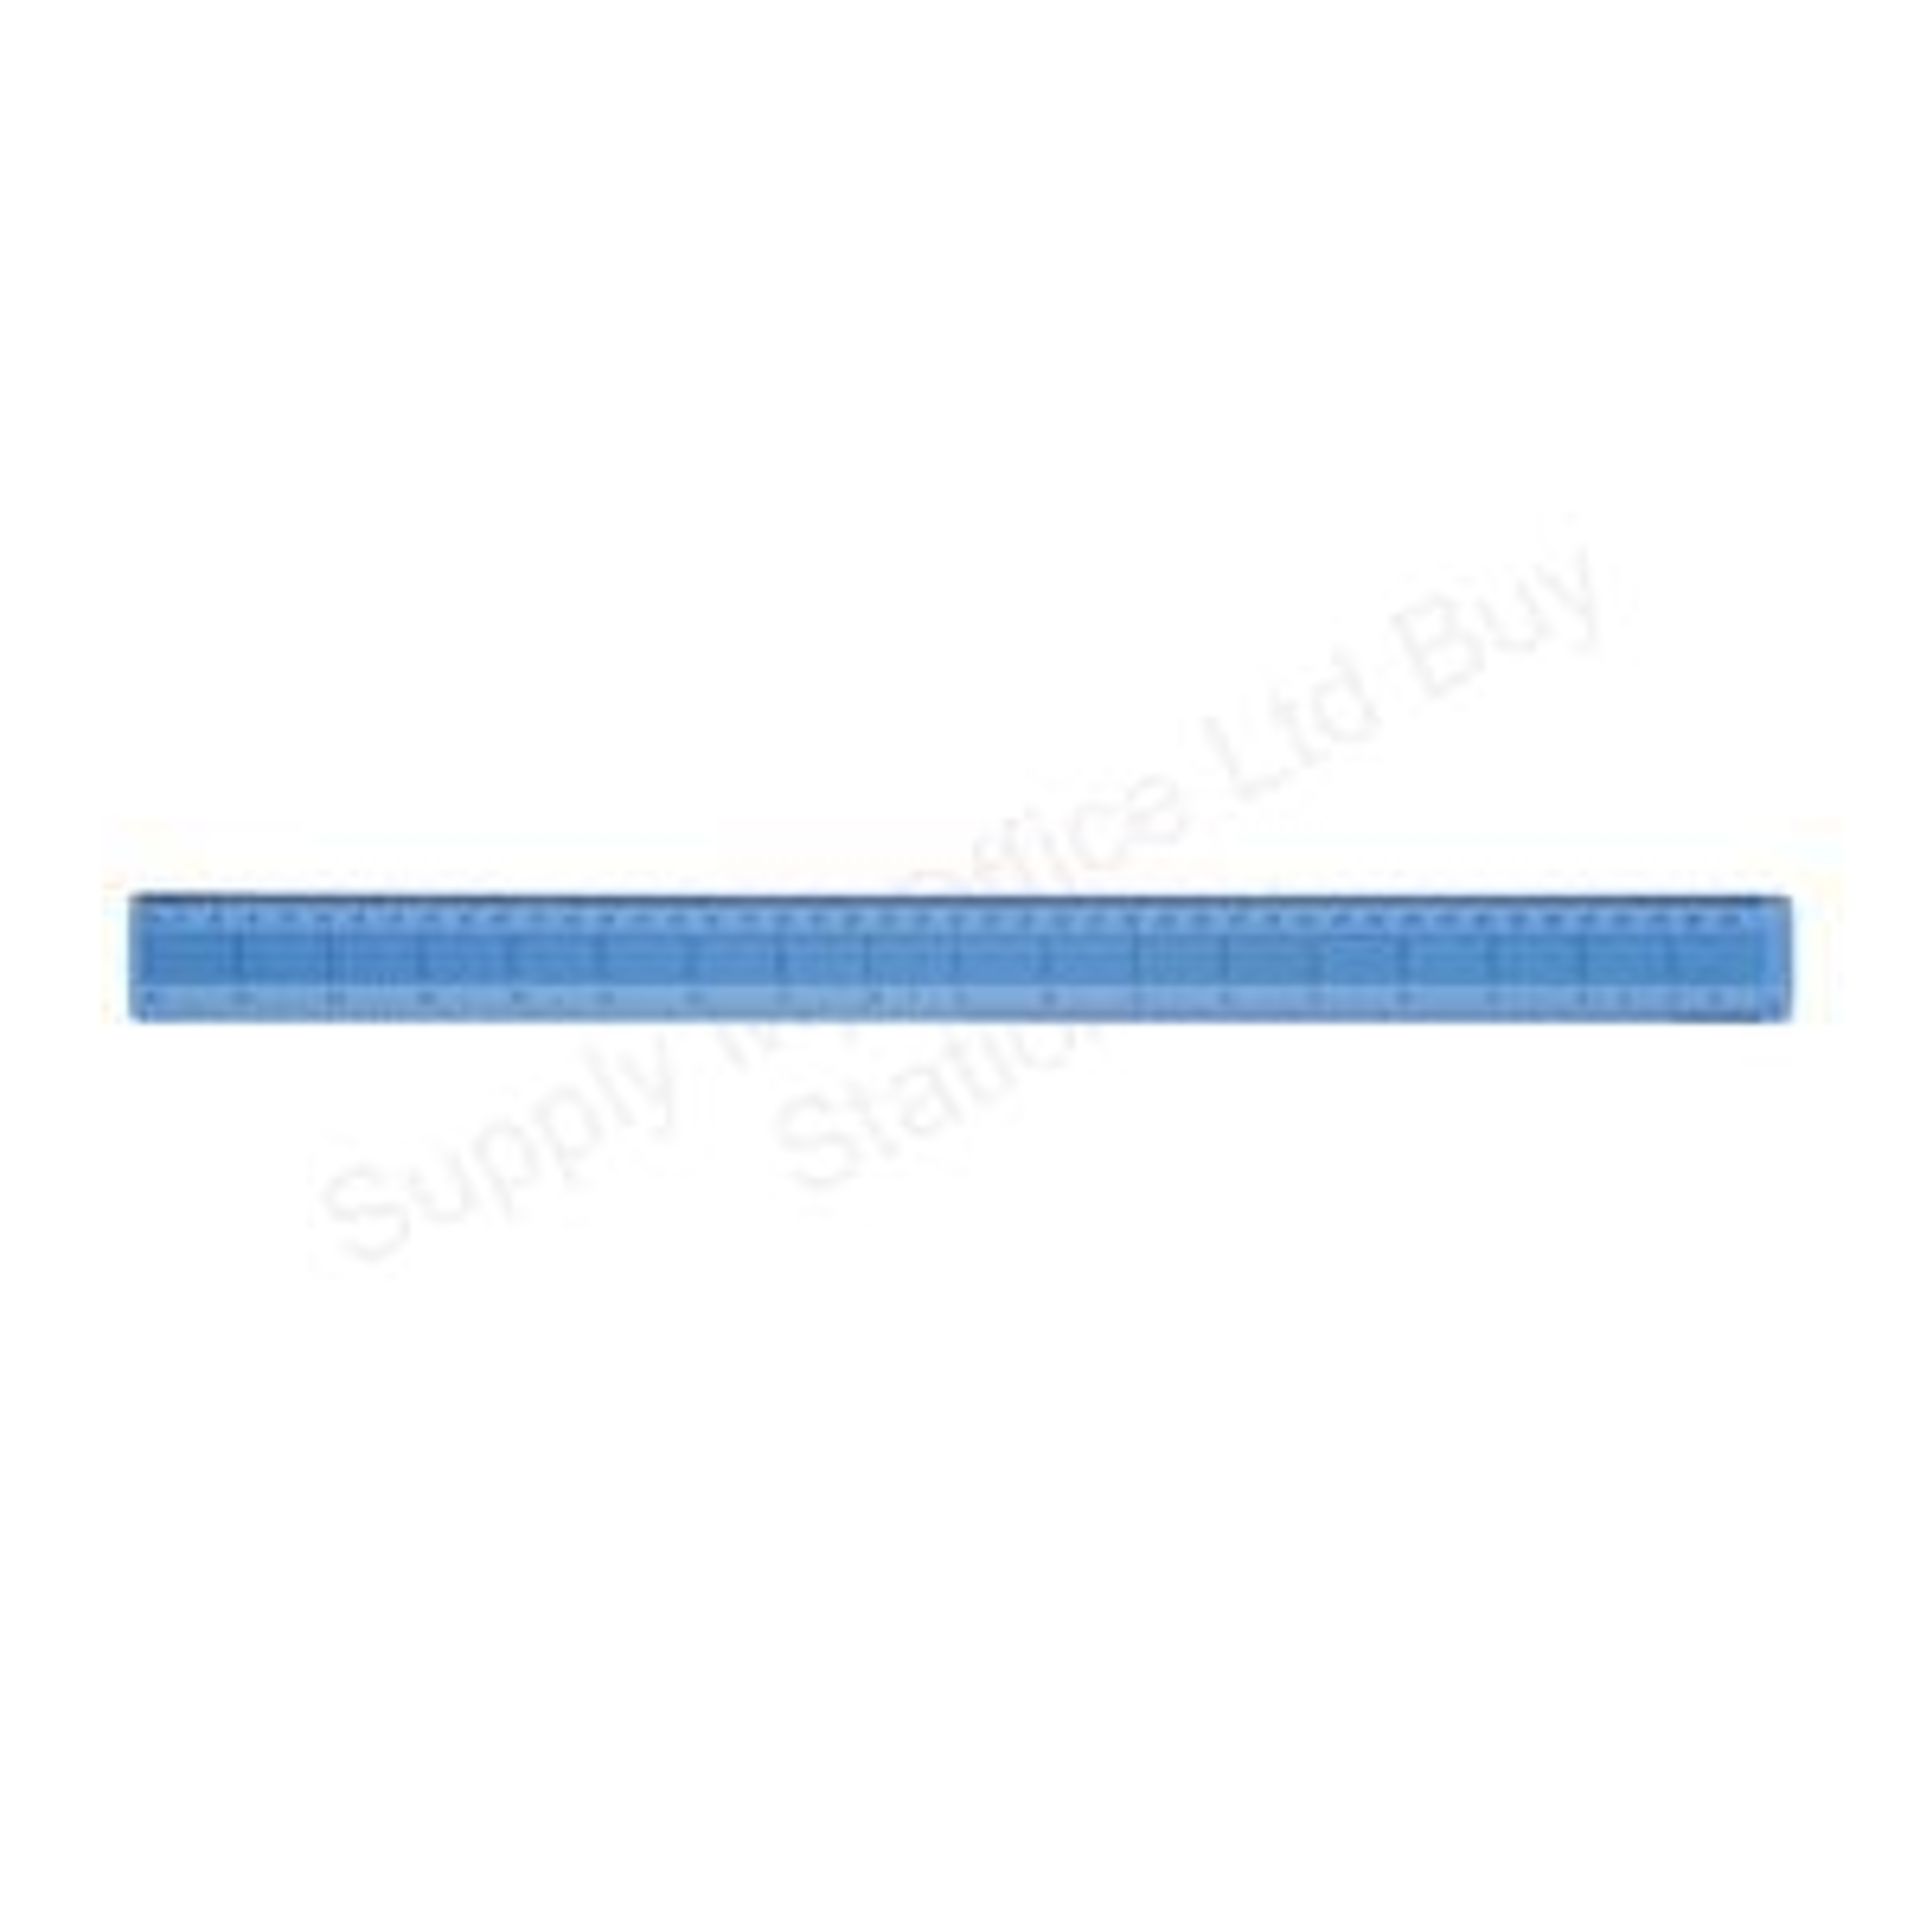 Grade A Pack of 10 18 inch Shatterproof Office Rulers X  4  Bid price to be multiplied by Four